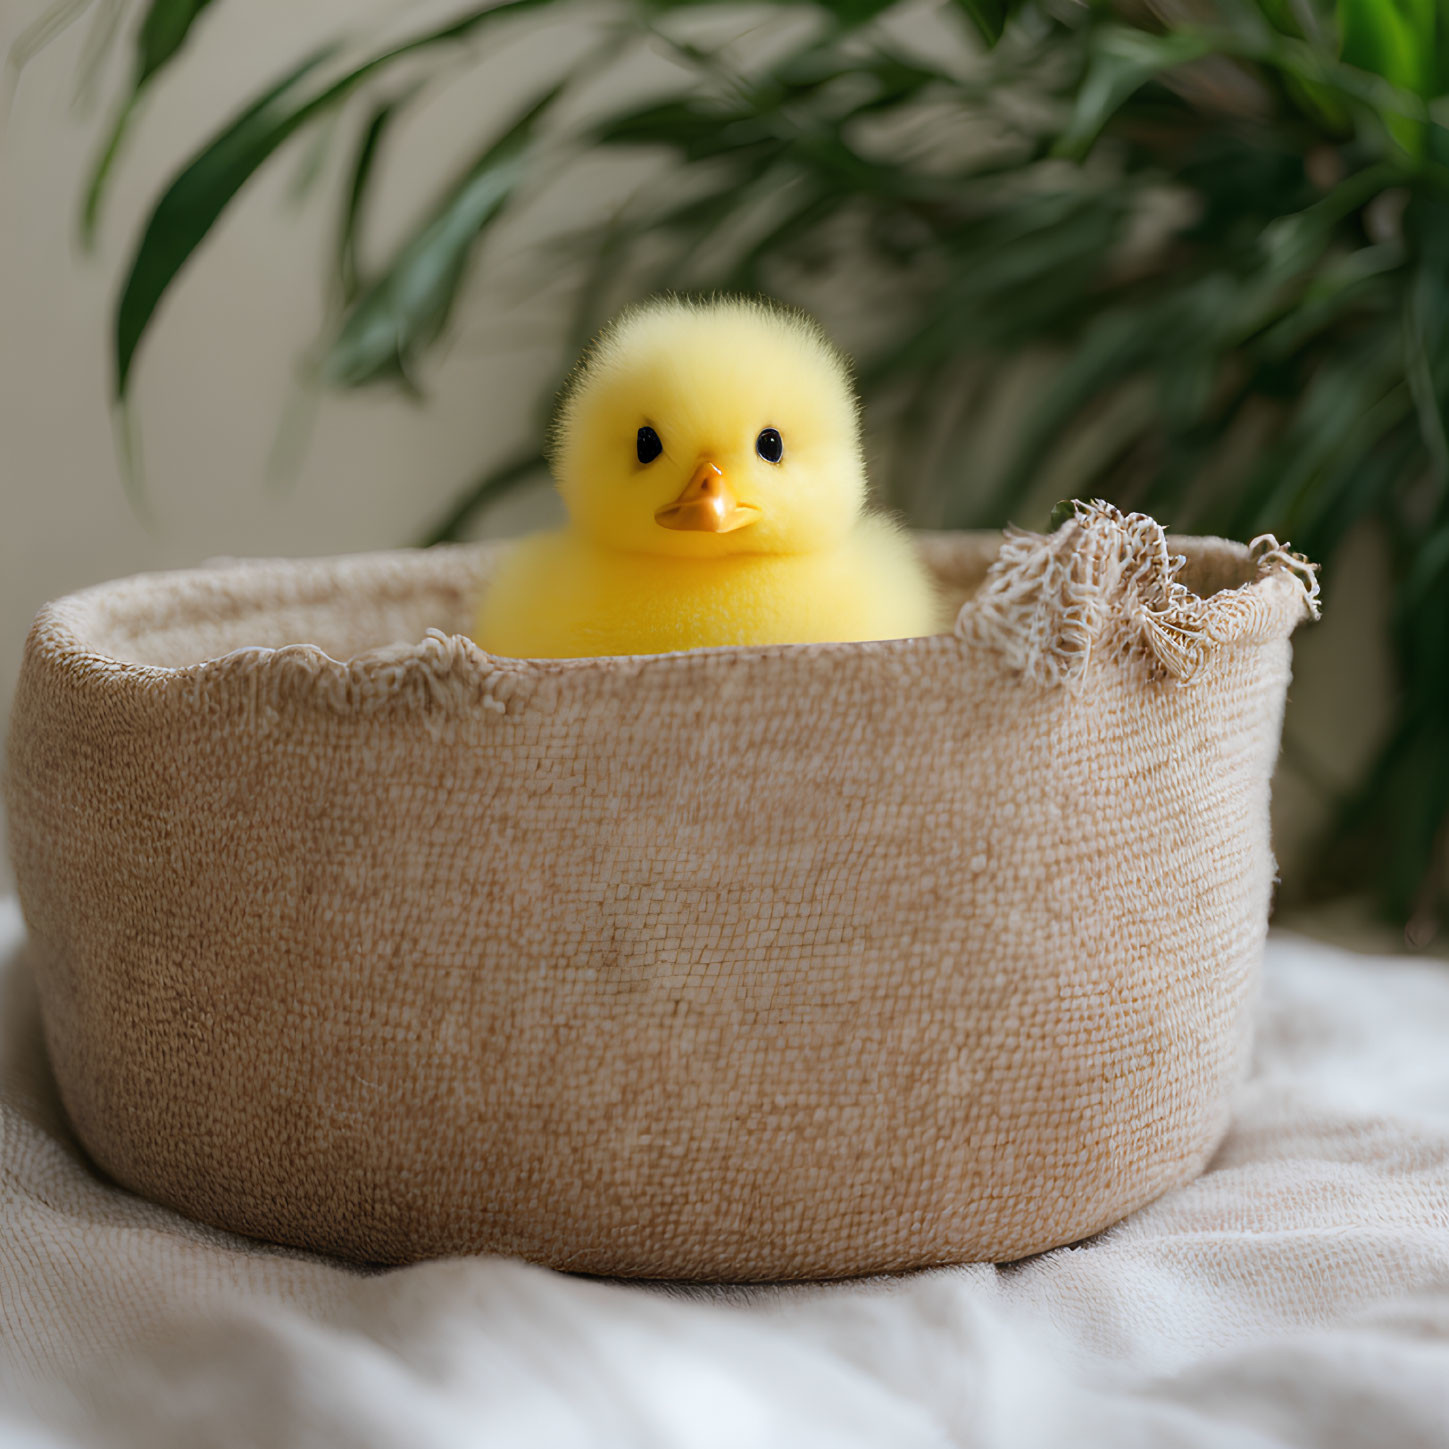 Rubber duck in woven basket with soft light and foliage